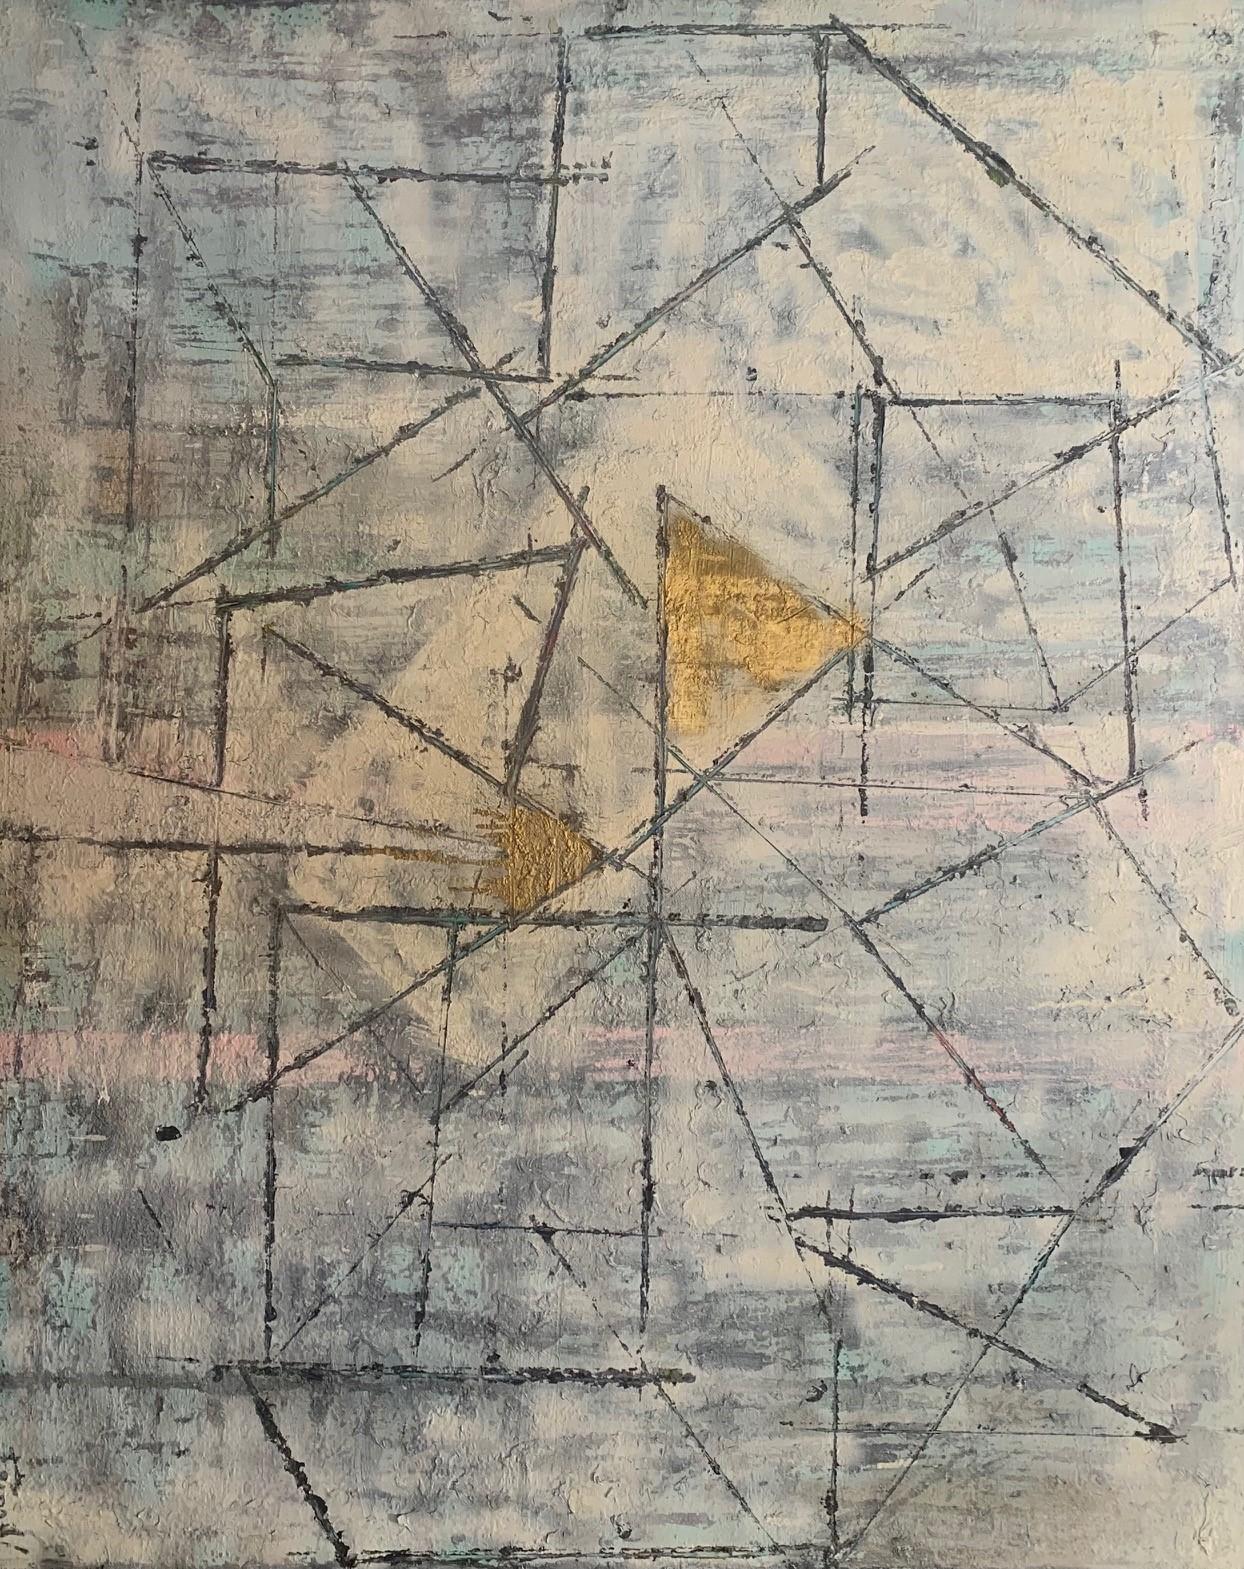 ‘Untitled’ Geometric, Abstract Art Mixed Media Contemporary Painting By Frida - Mixed Media Art by Frida Willis